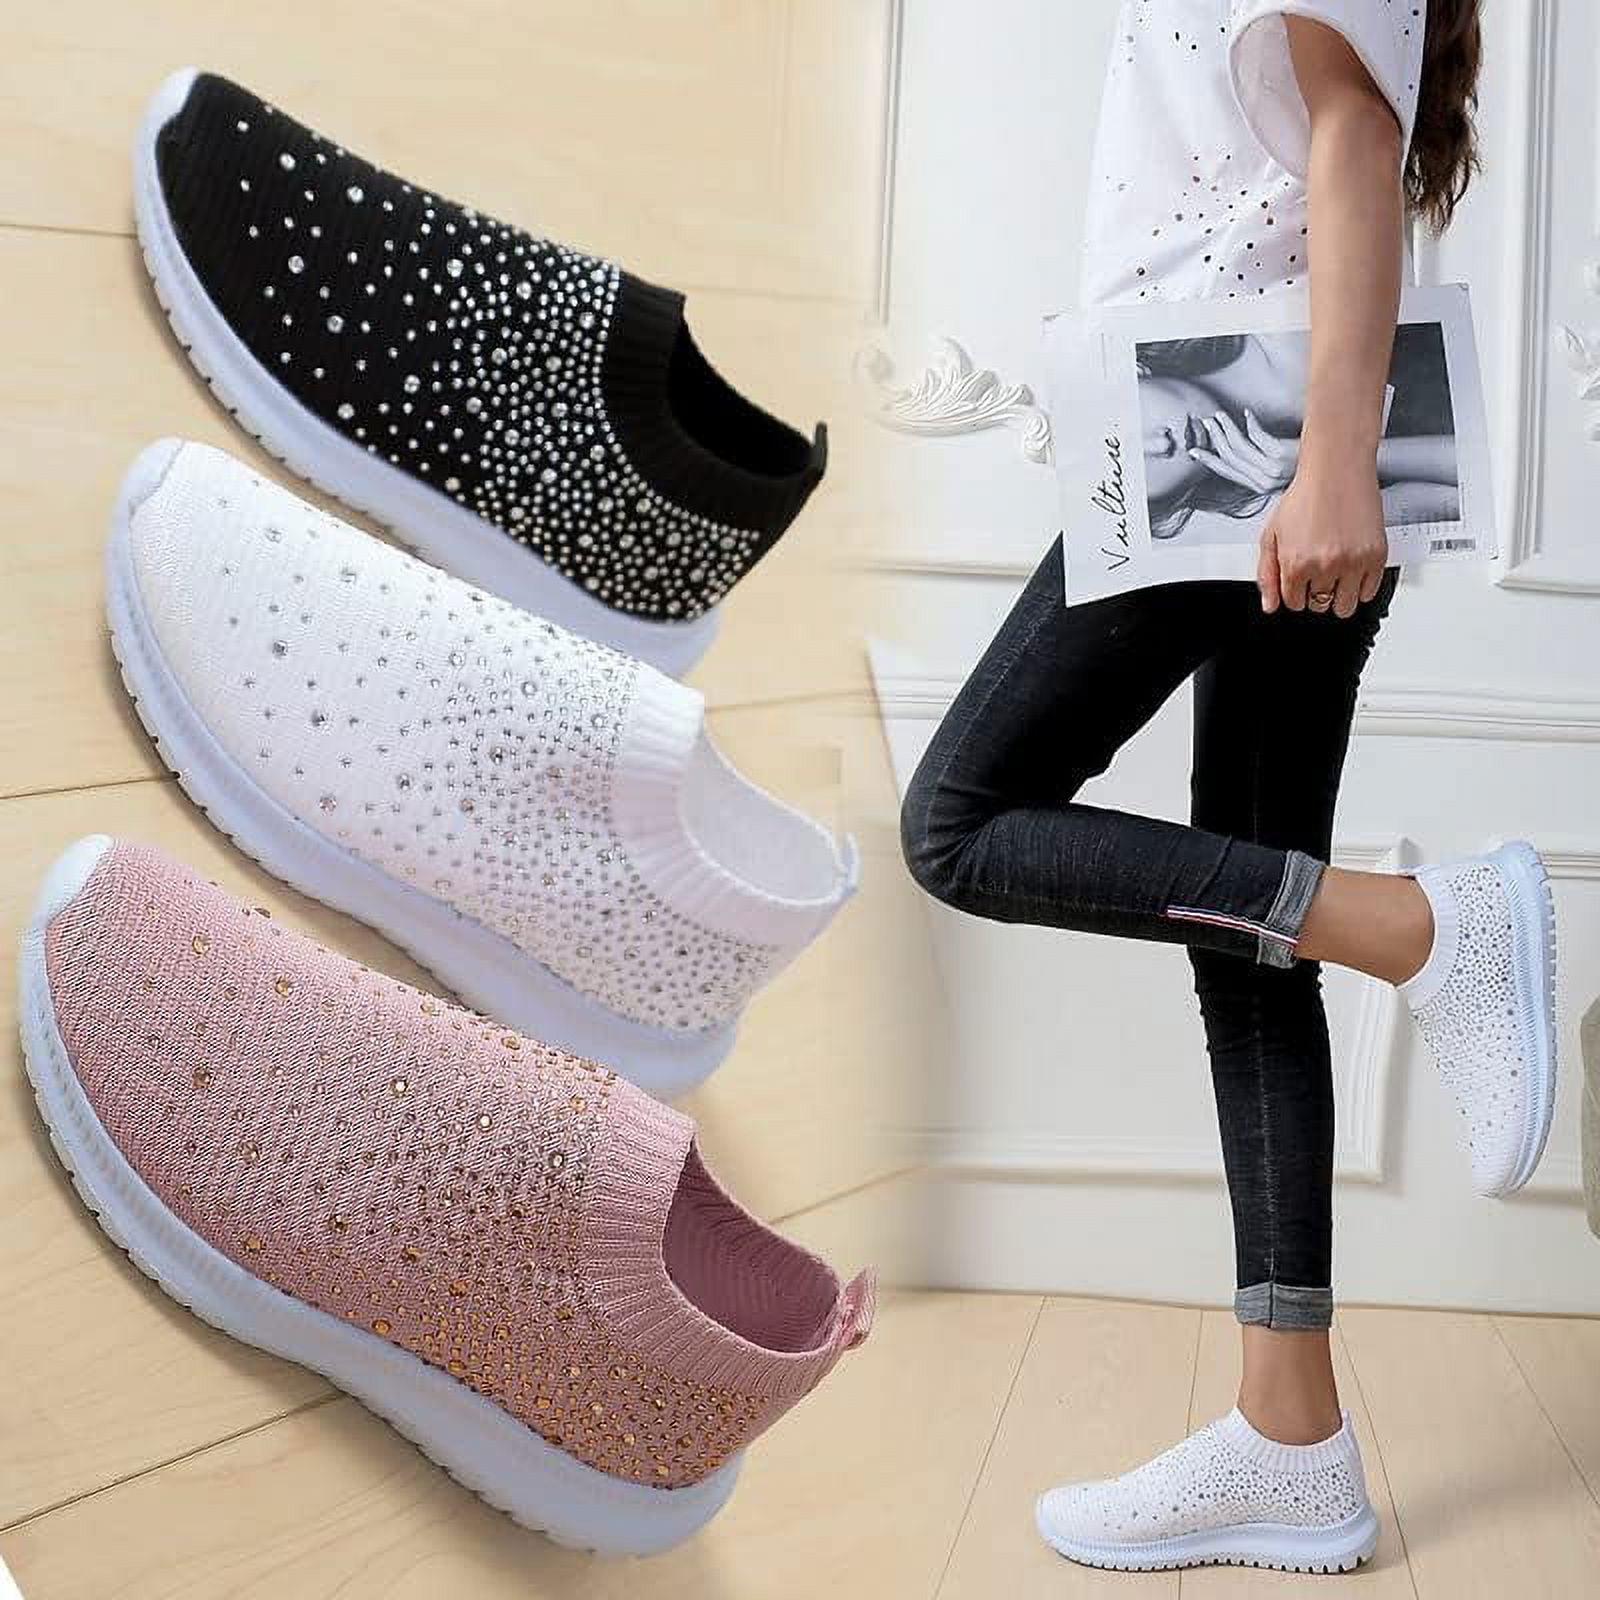 Women's Shoes Wear Non-slip Shoes Sneakers Beads Sparkling Socks Rhinestone  Sneakers Casual Running Light Shoes